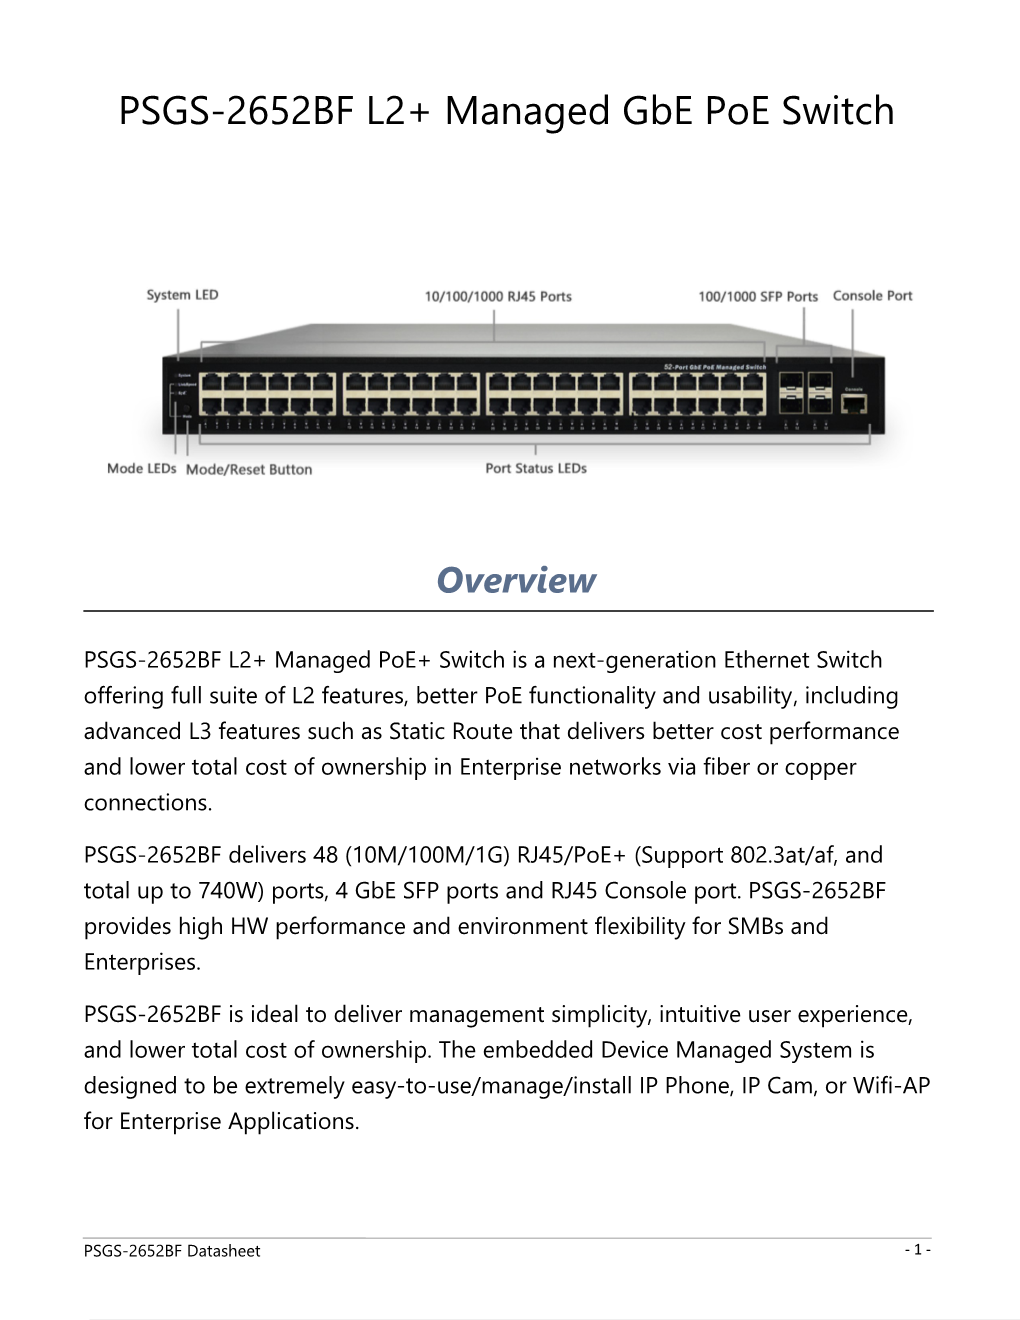 PSGS-2652BF L2+ Managed Gbe Poe Switch